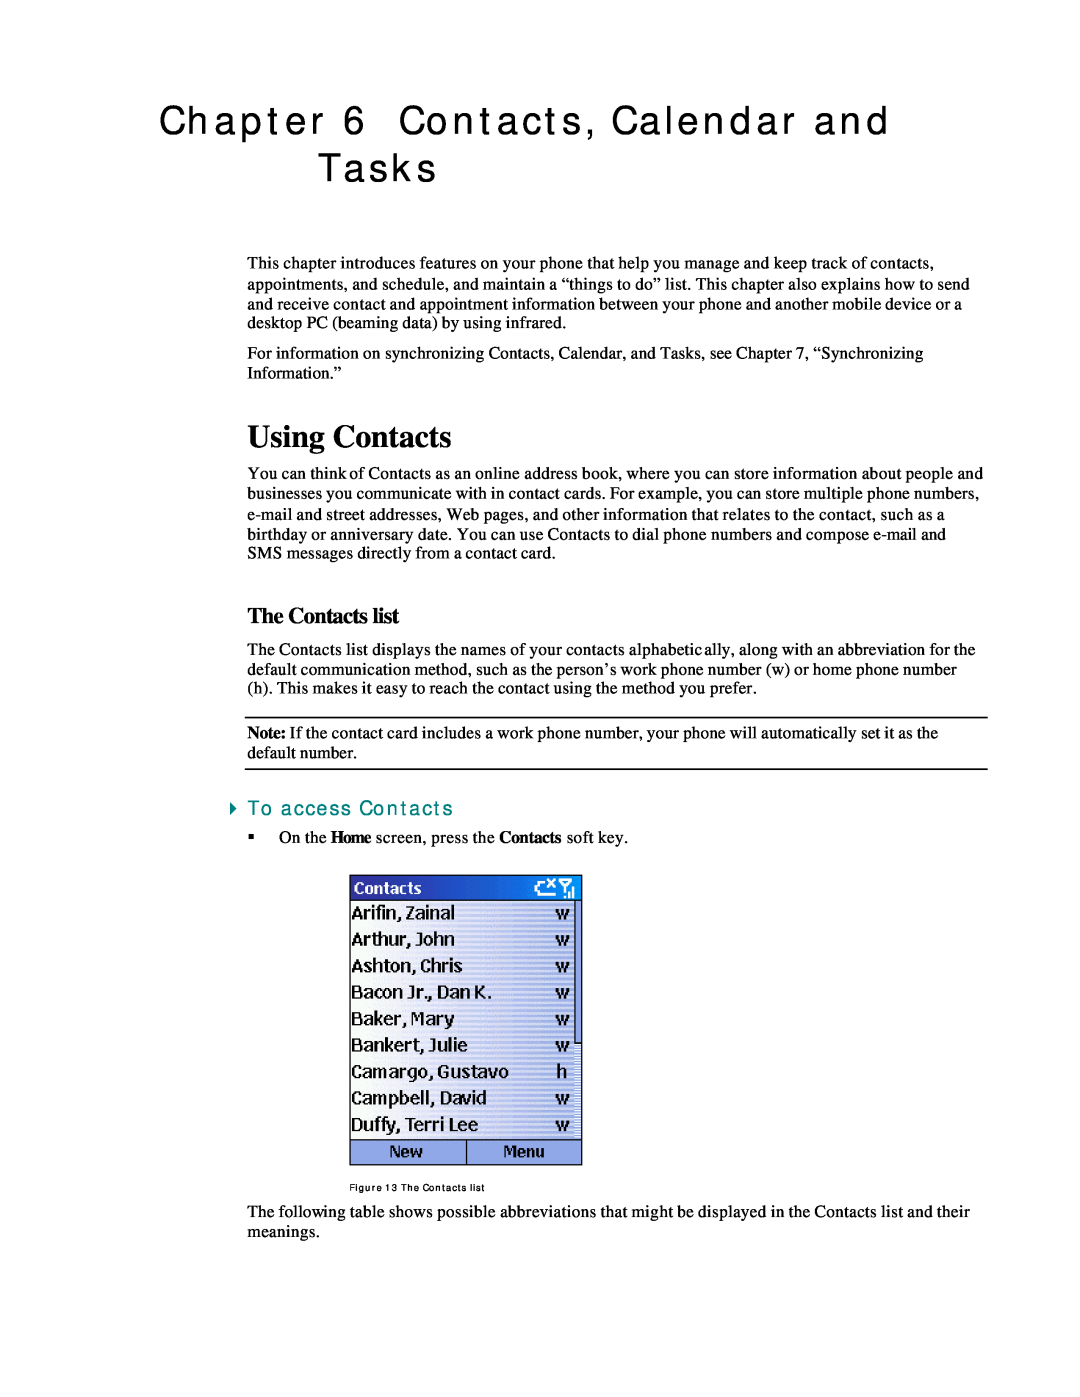 Microsoft Smartphone 2002 manual Contacts, Calendar and Tasks, Using Contacts, The Contacts list, To access Contacts 